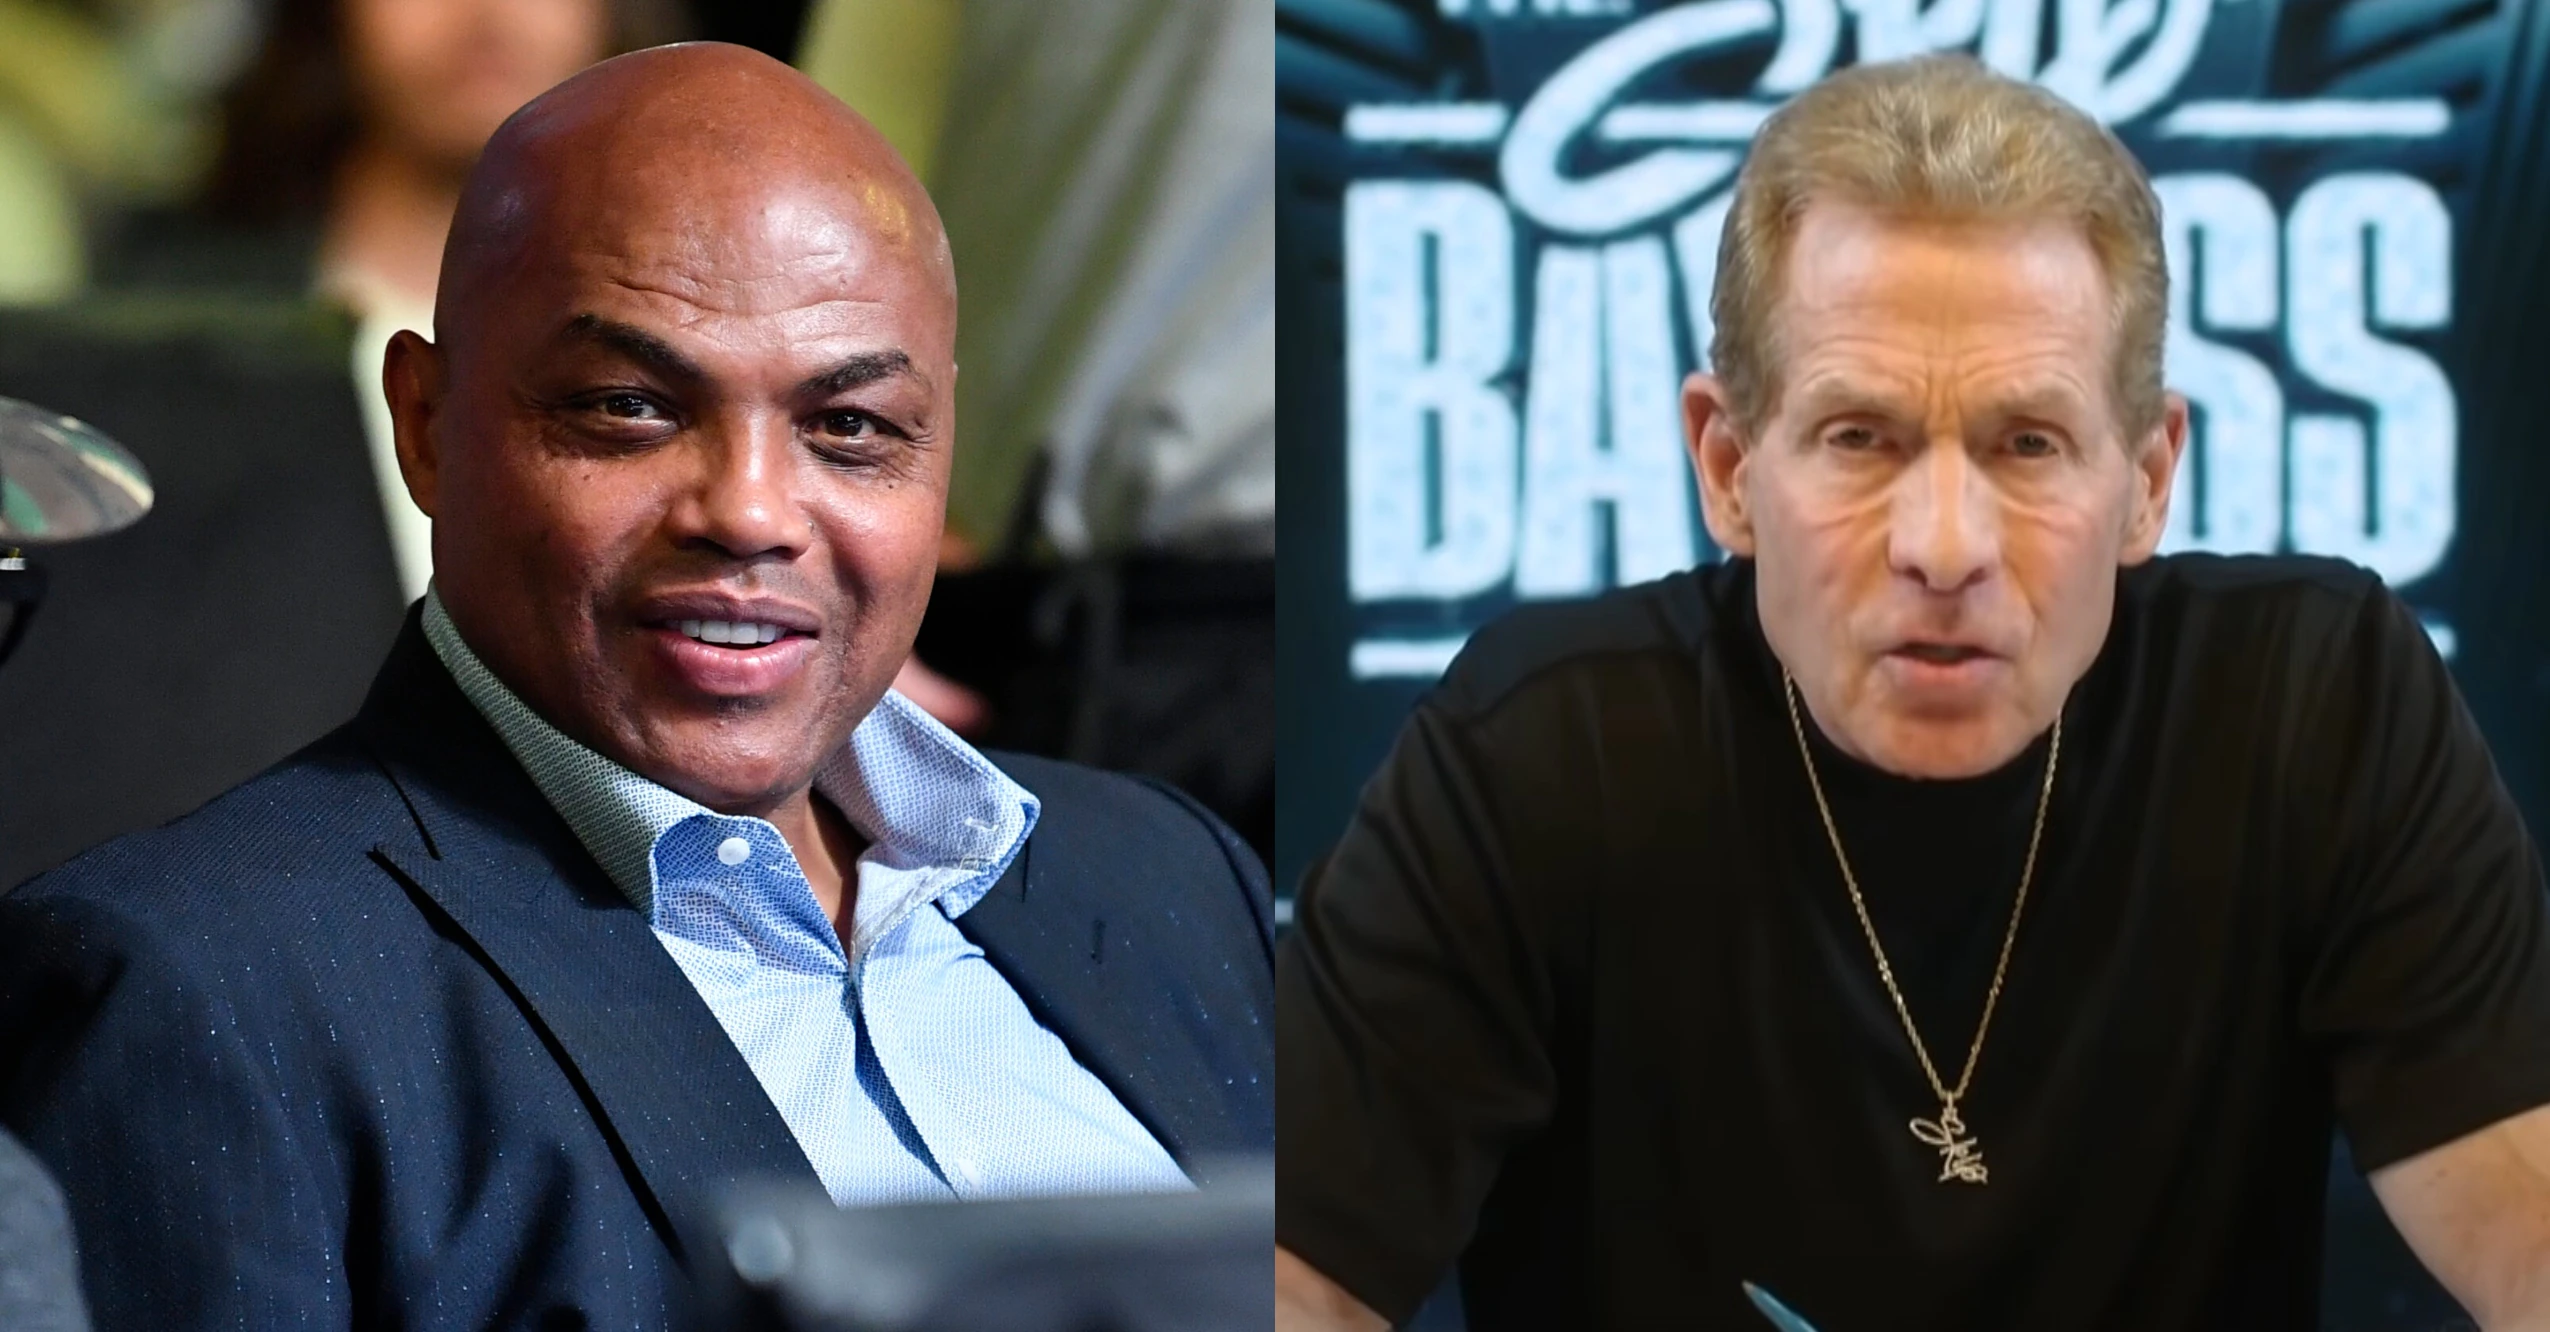 Skip Bayless Says Charles Barkley’s ‘Death Threats’ Are Scaring His Wife